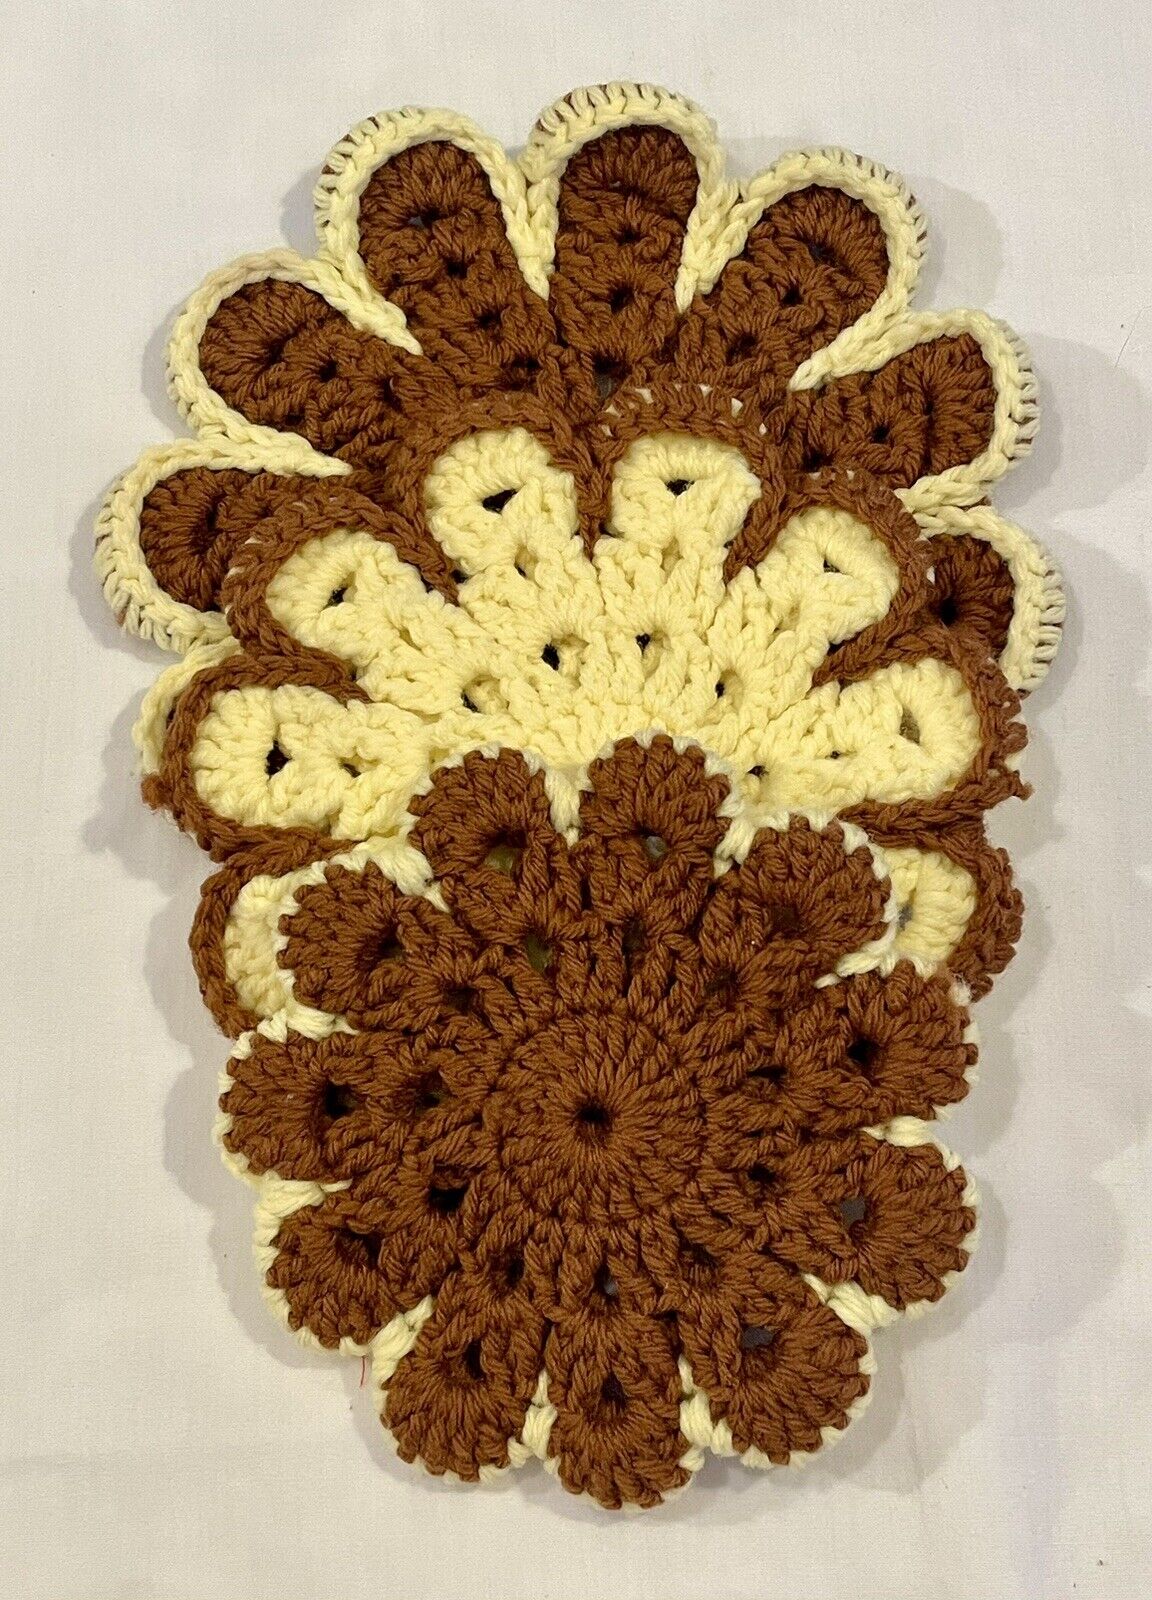 Lot of 3 Vintage Knit Crocheted Pot Holders  Hot Pad Homemade Brown & Yellow